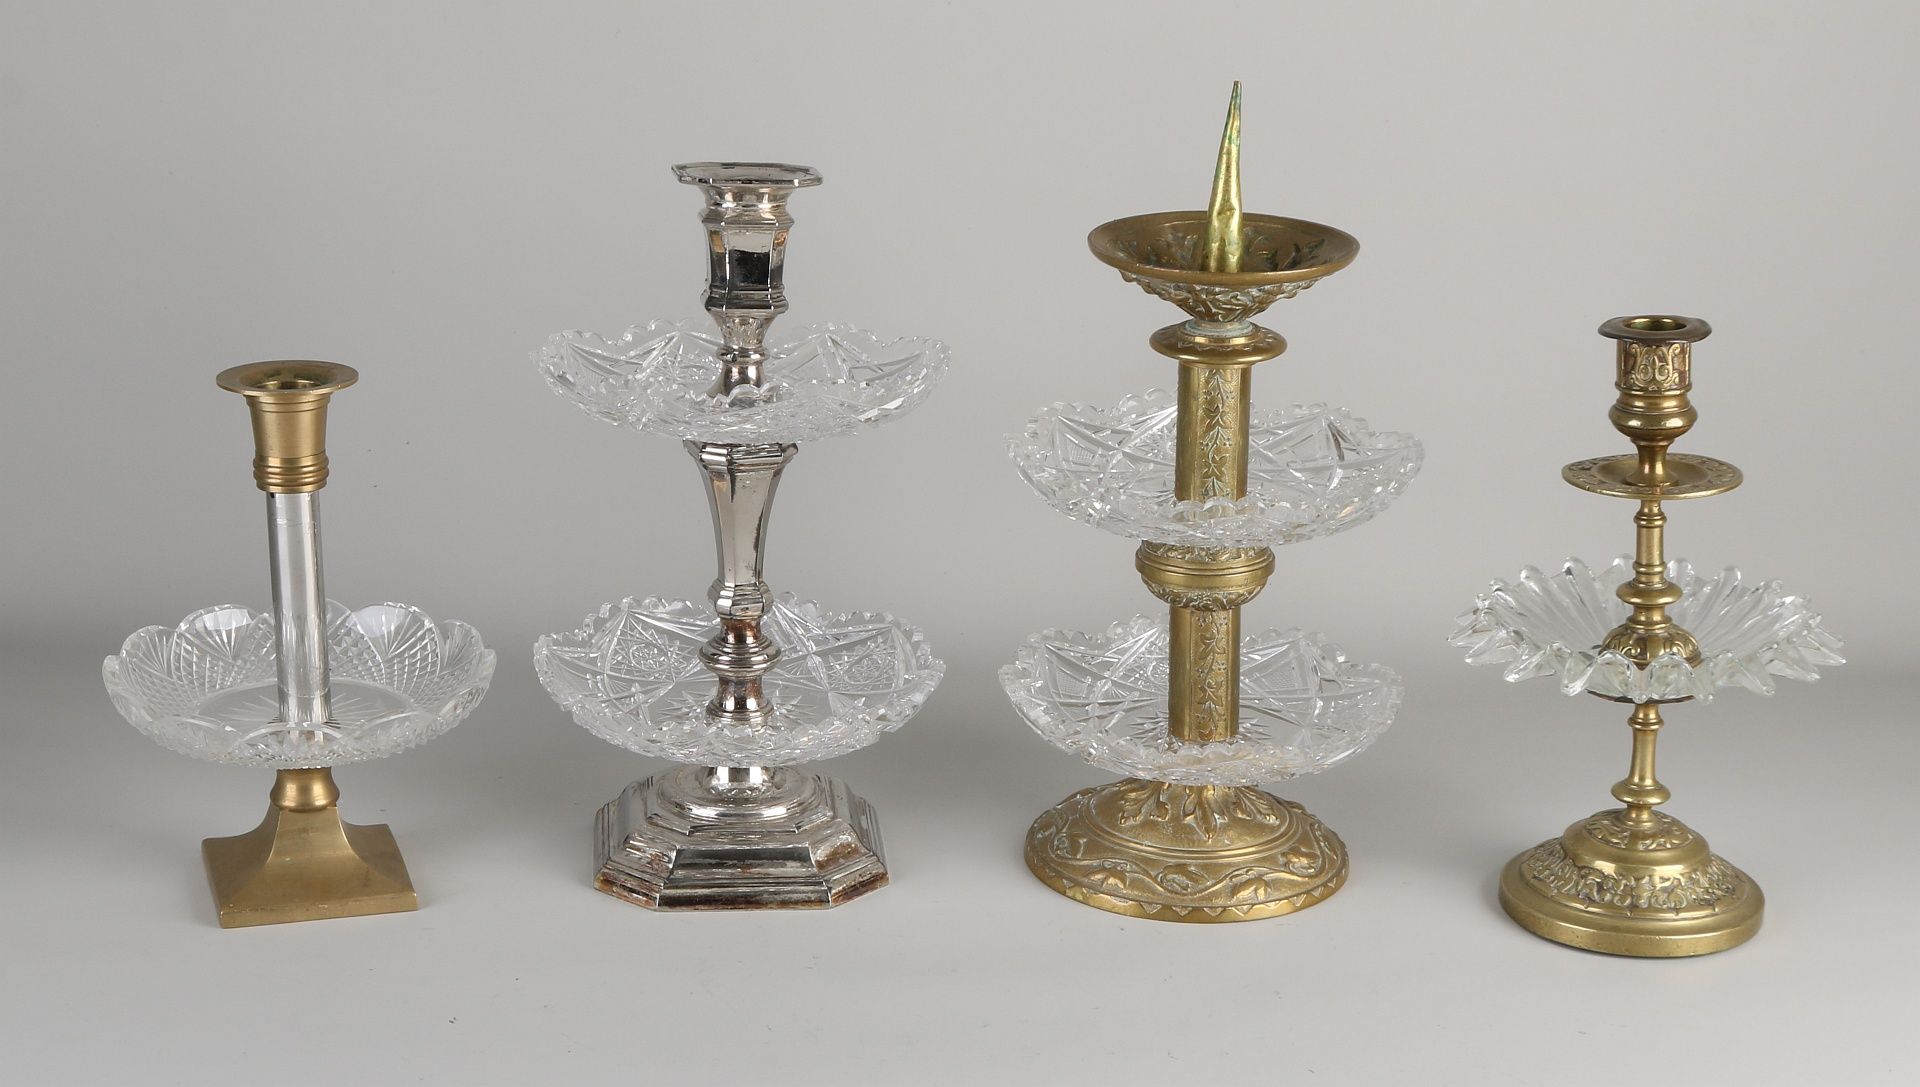 4x Old candlesticks with tiers